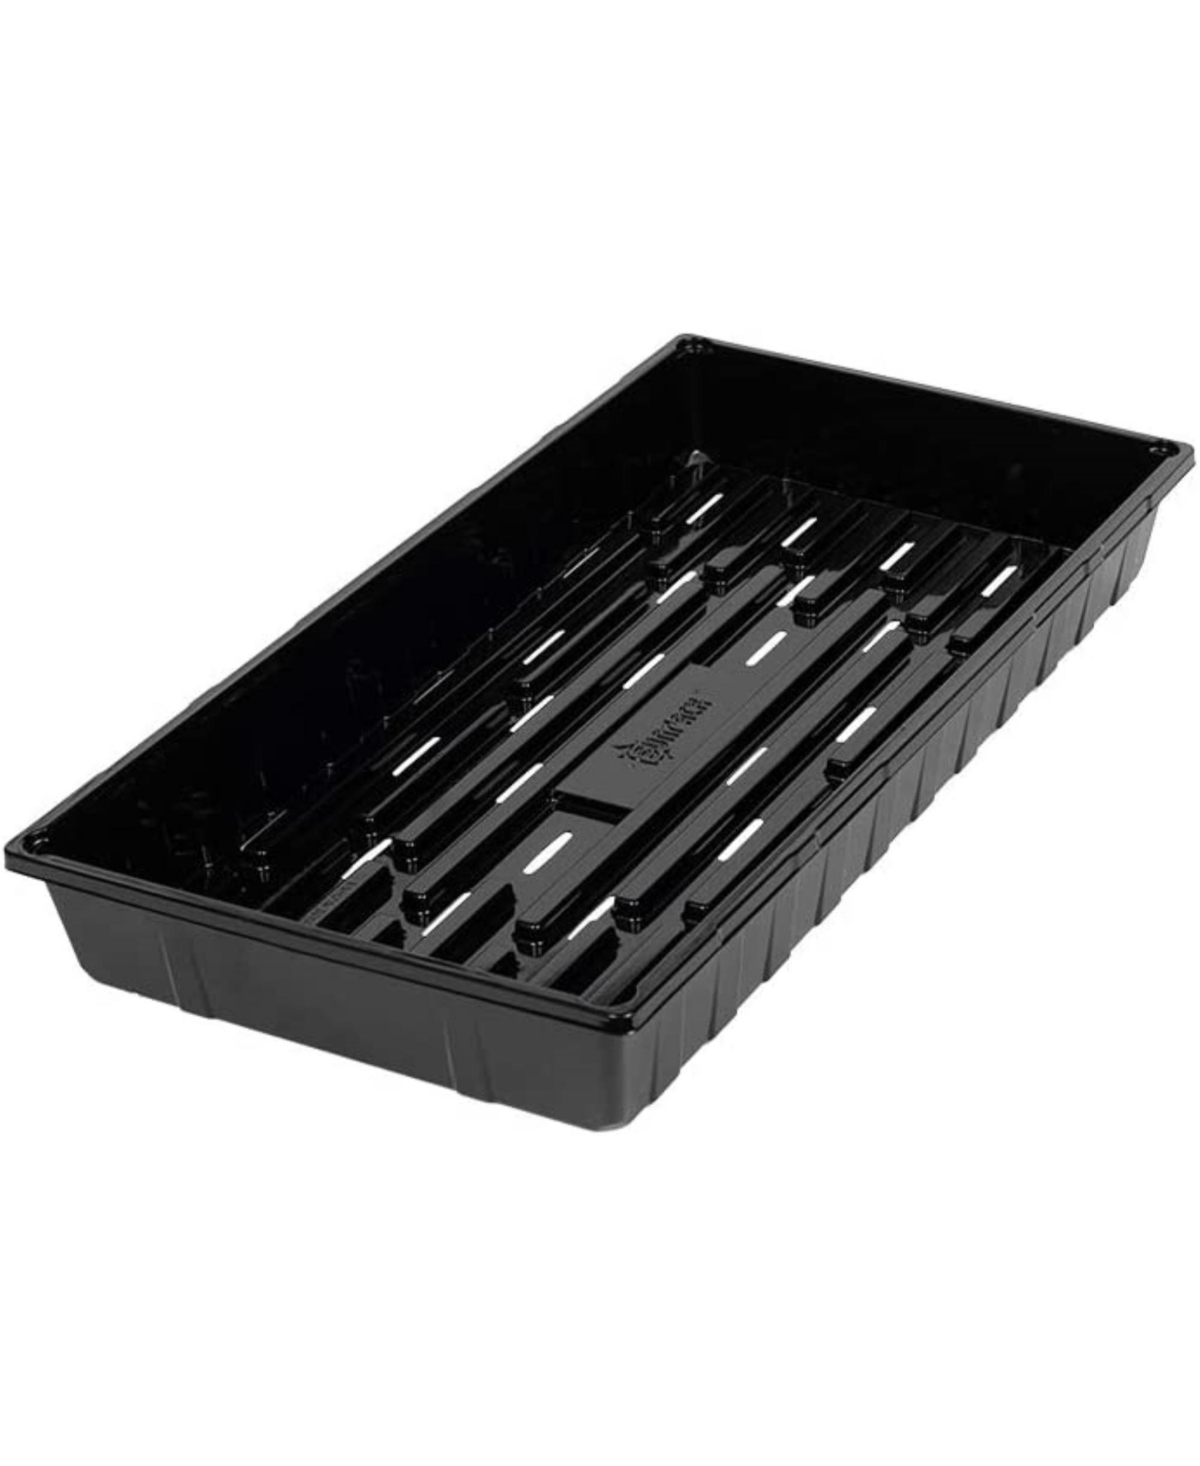 Products Food Grade and Bpa Free, 10 Inches x 20 Inches Tray, with Drain Holes, Black - Black